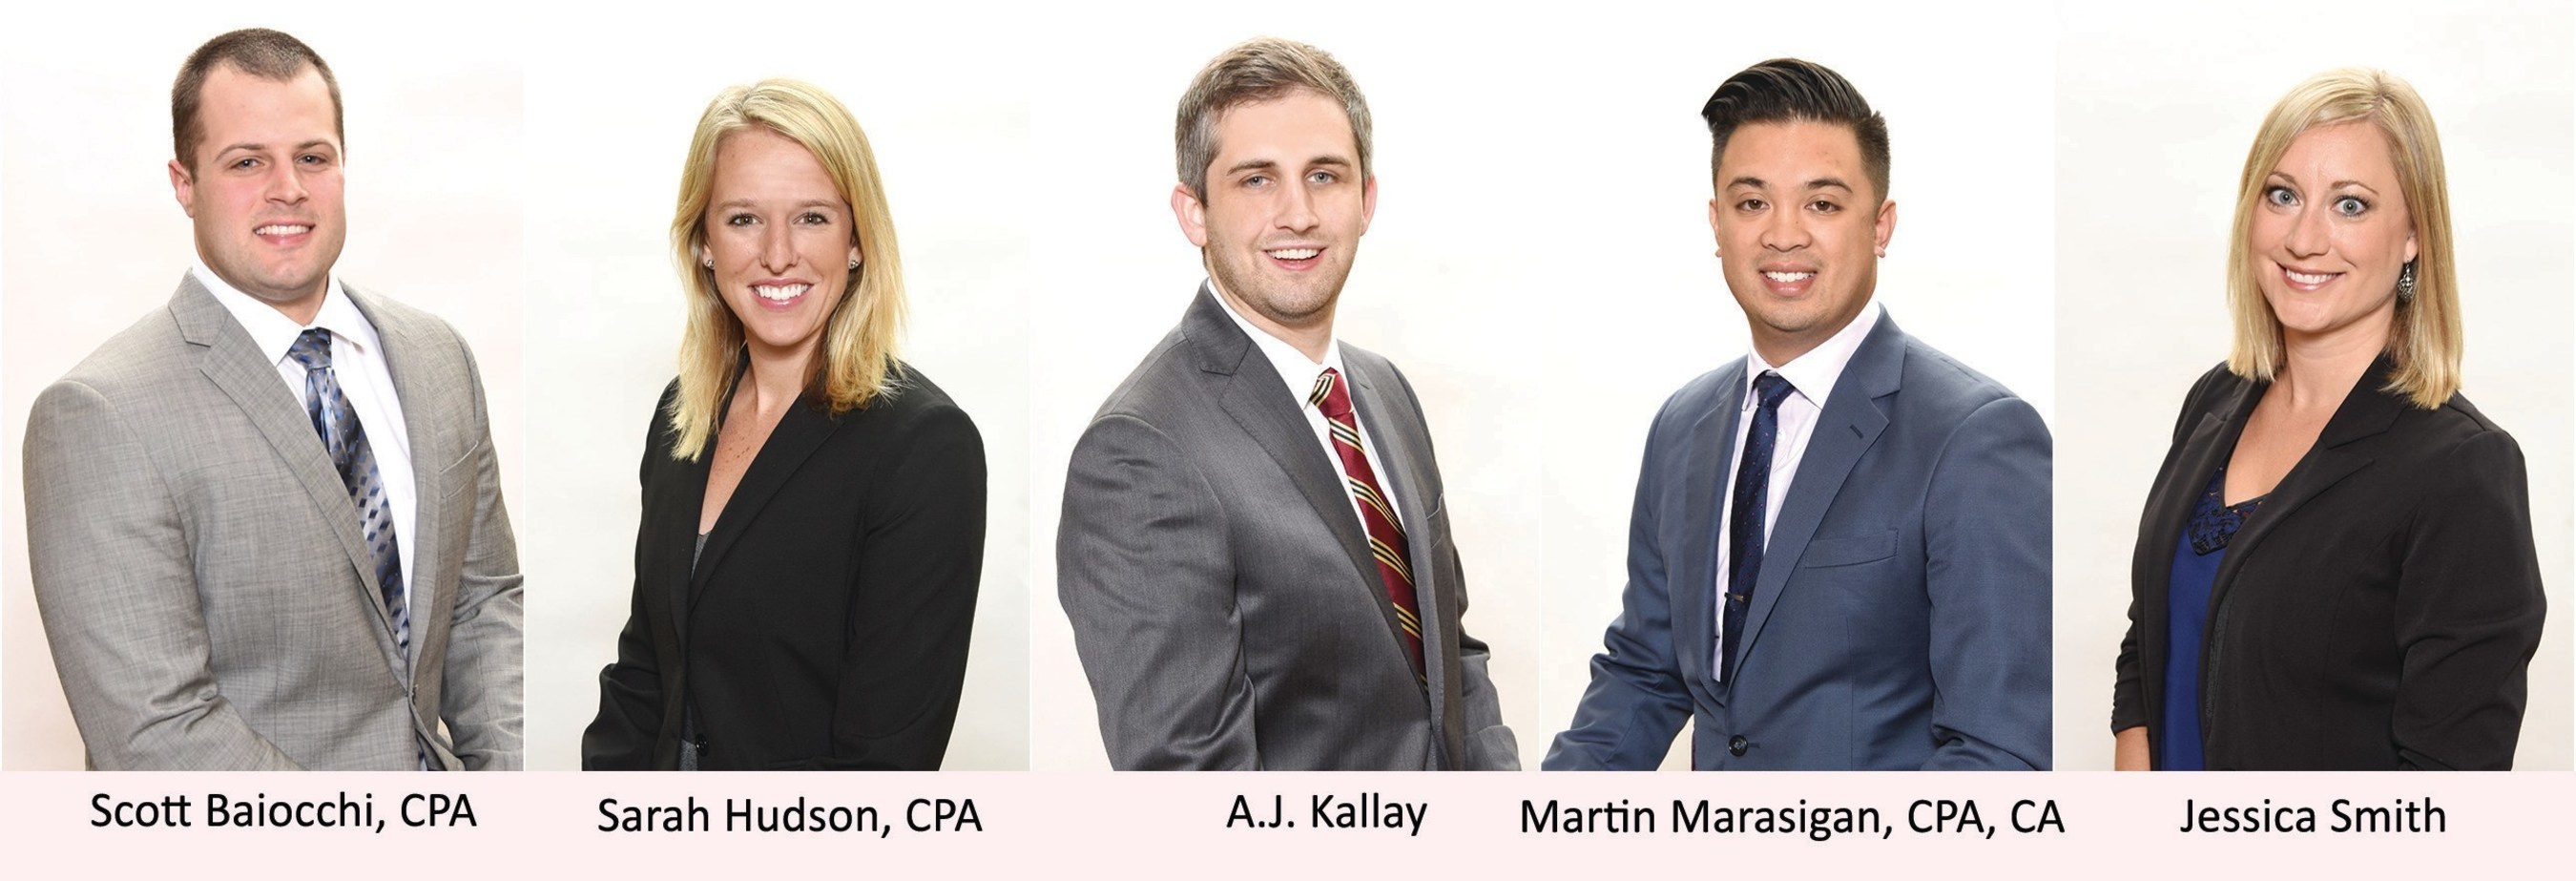 The Siegfried Group welcomes new professionals to its Central region